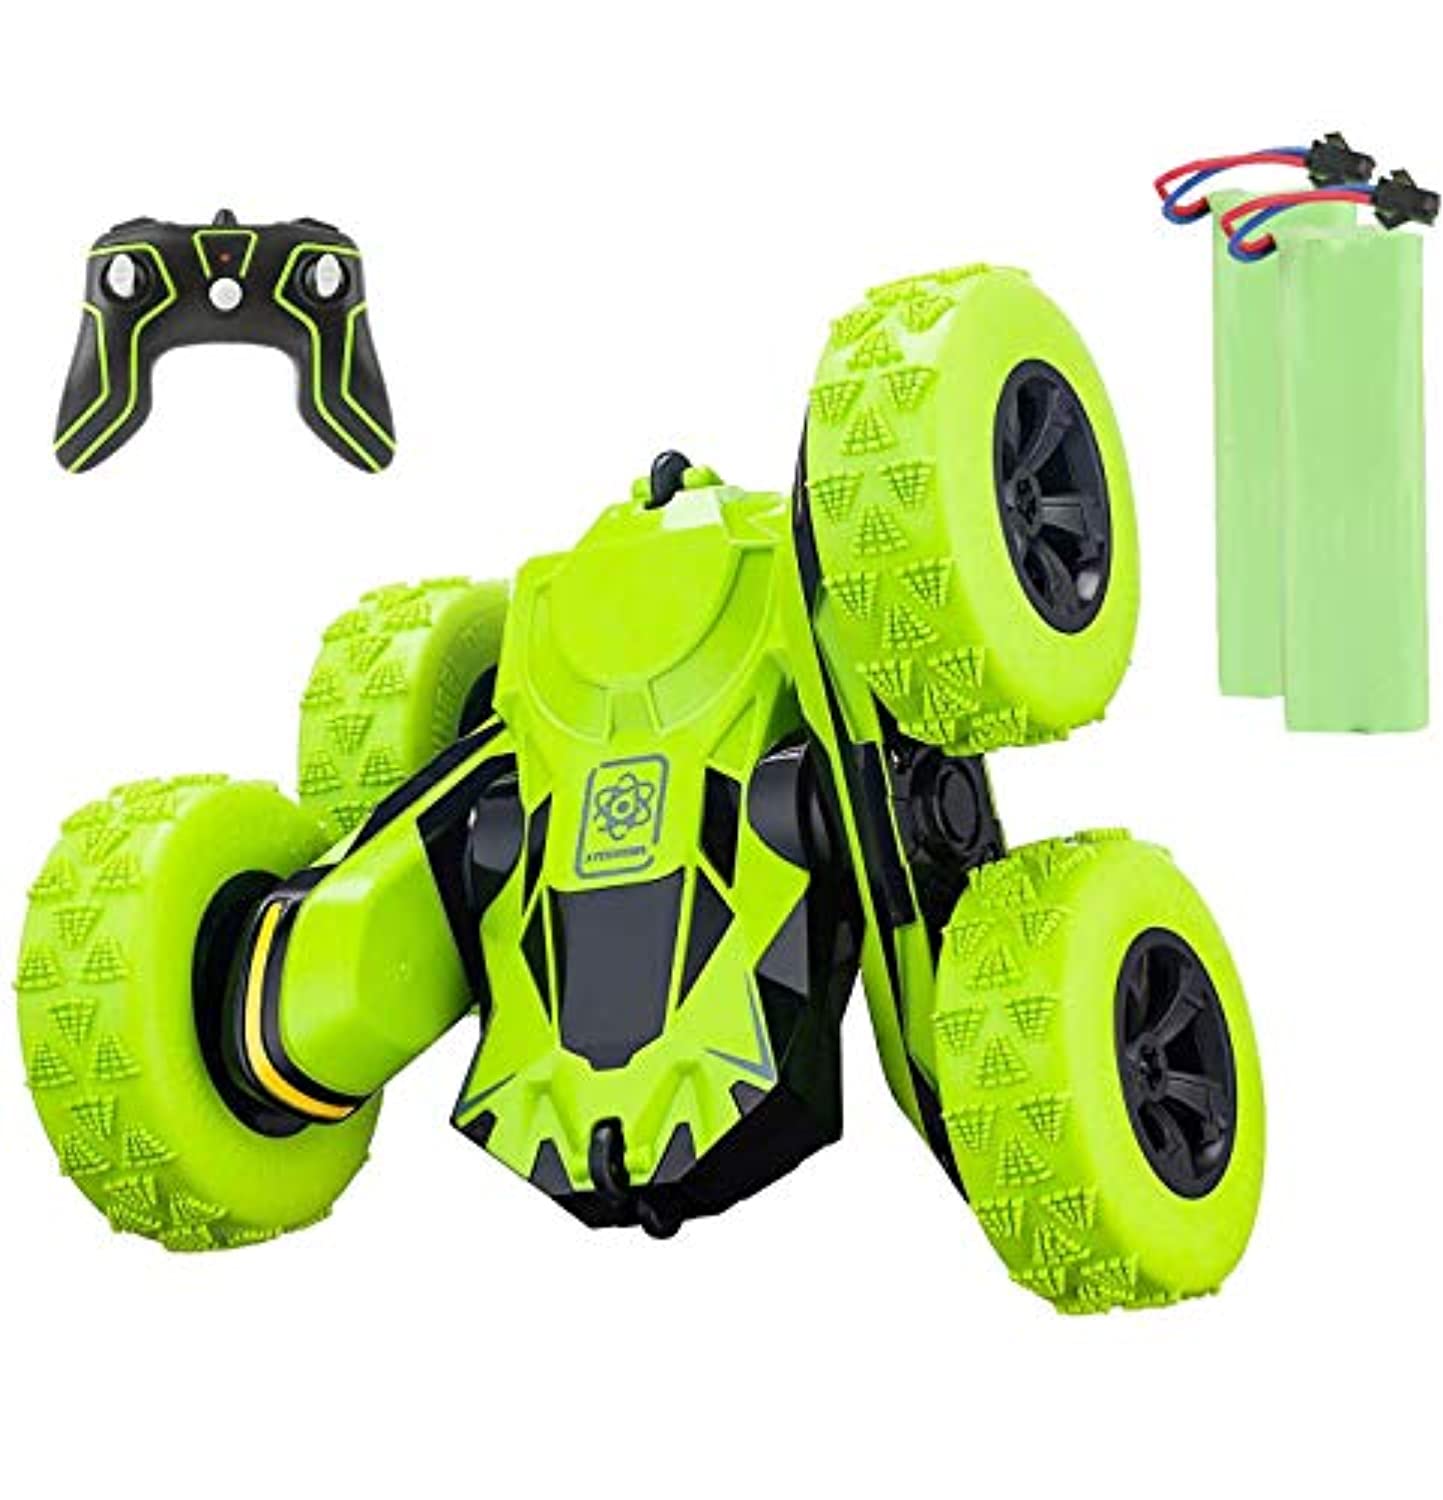 Apsung RC Stunt Car,4WD Rechargeable 2.4Ghz Remote Control Car Toy Cars